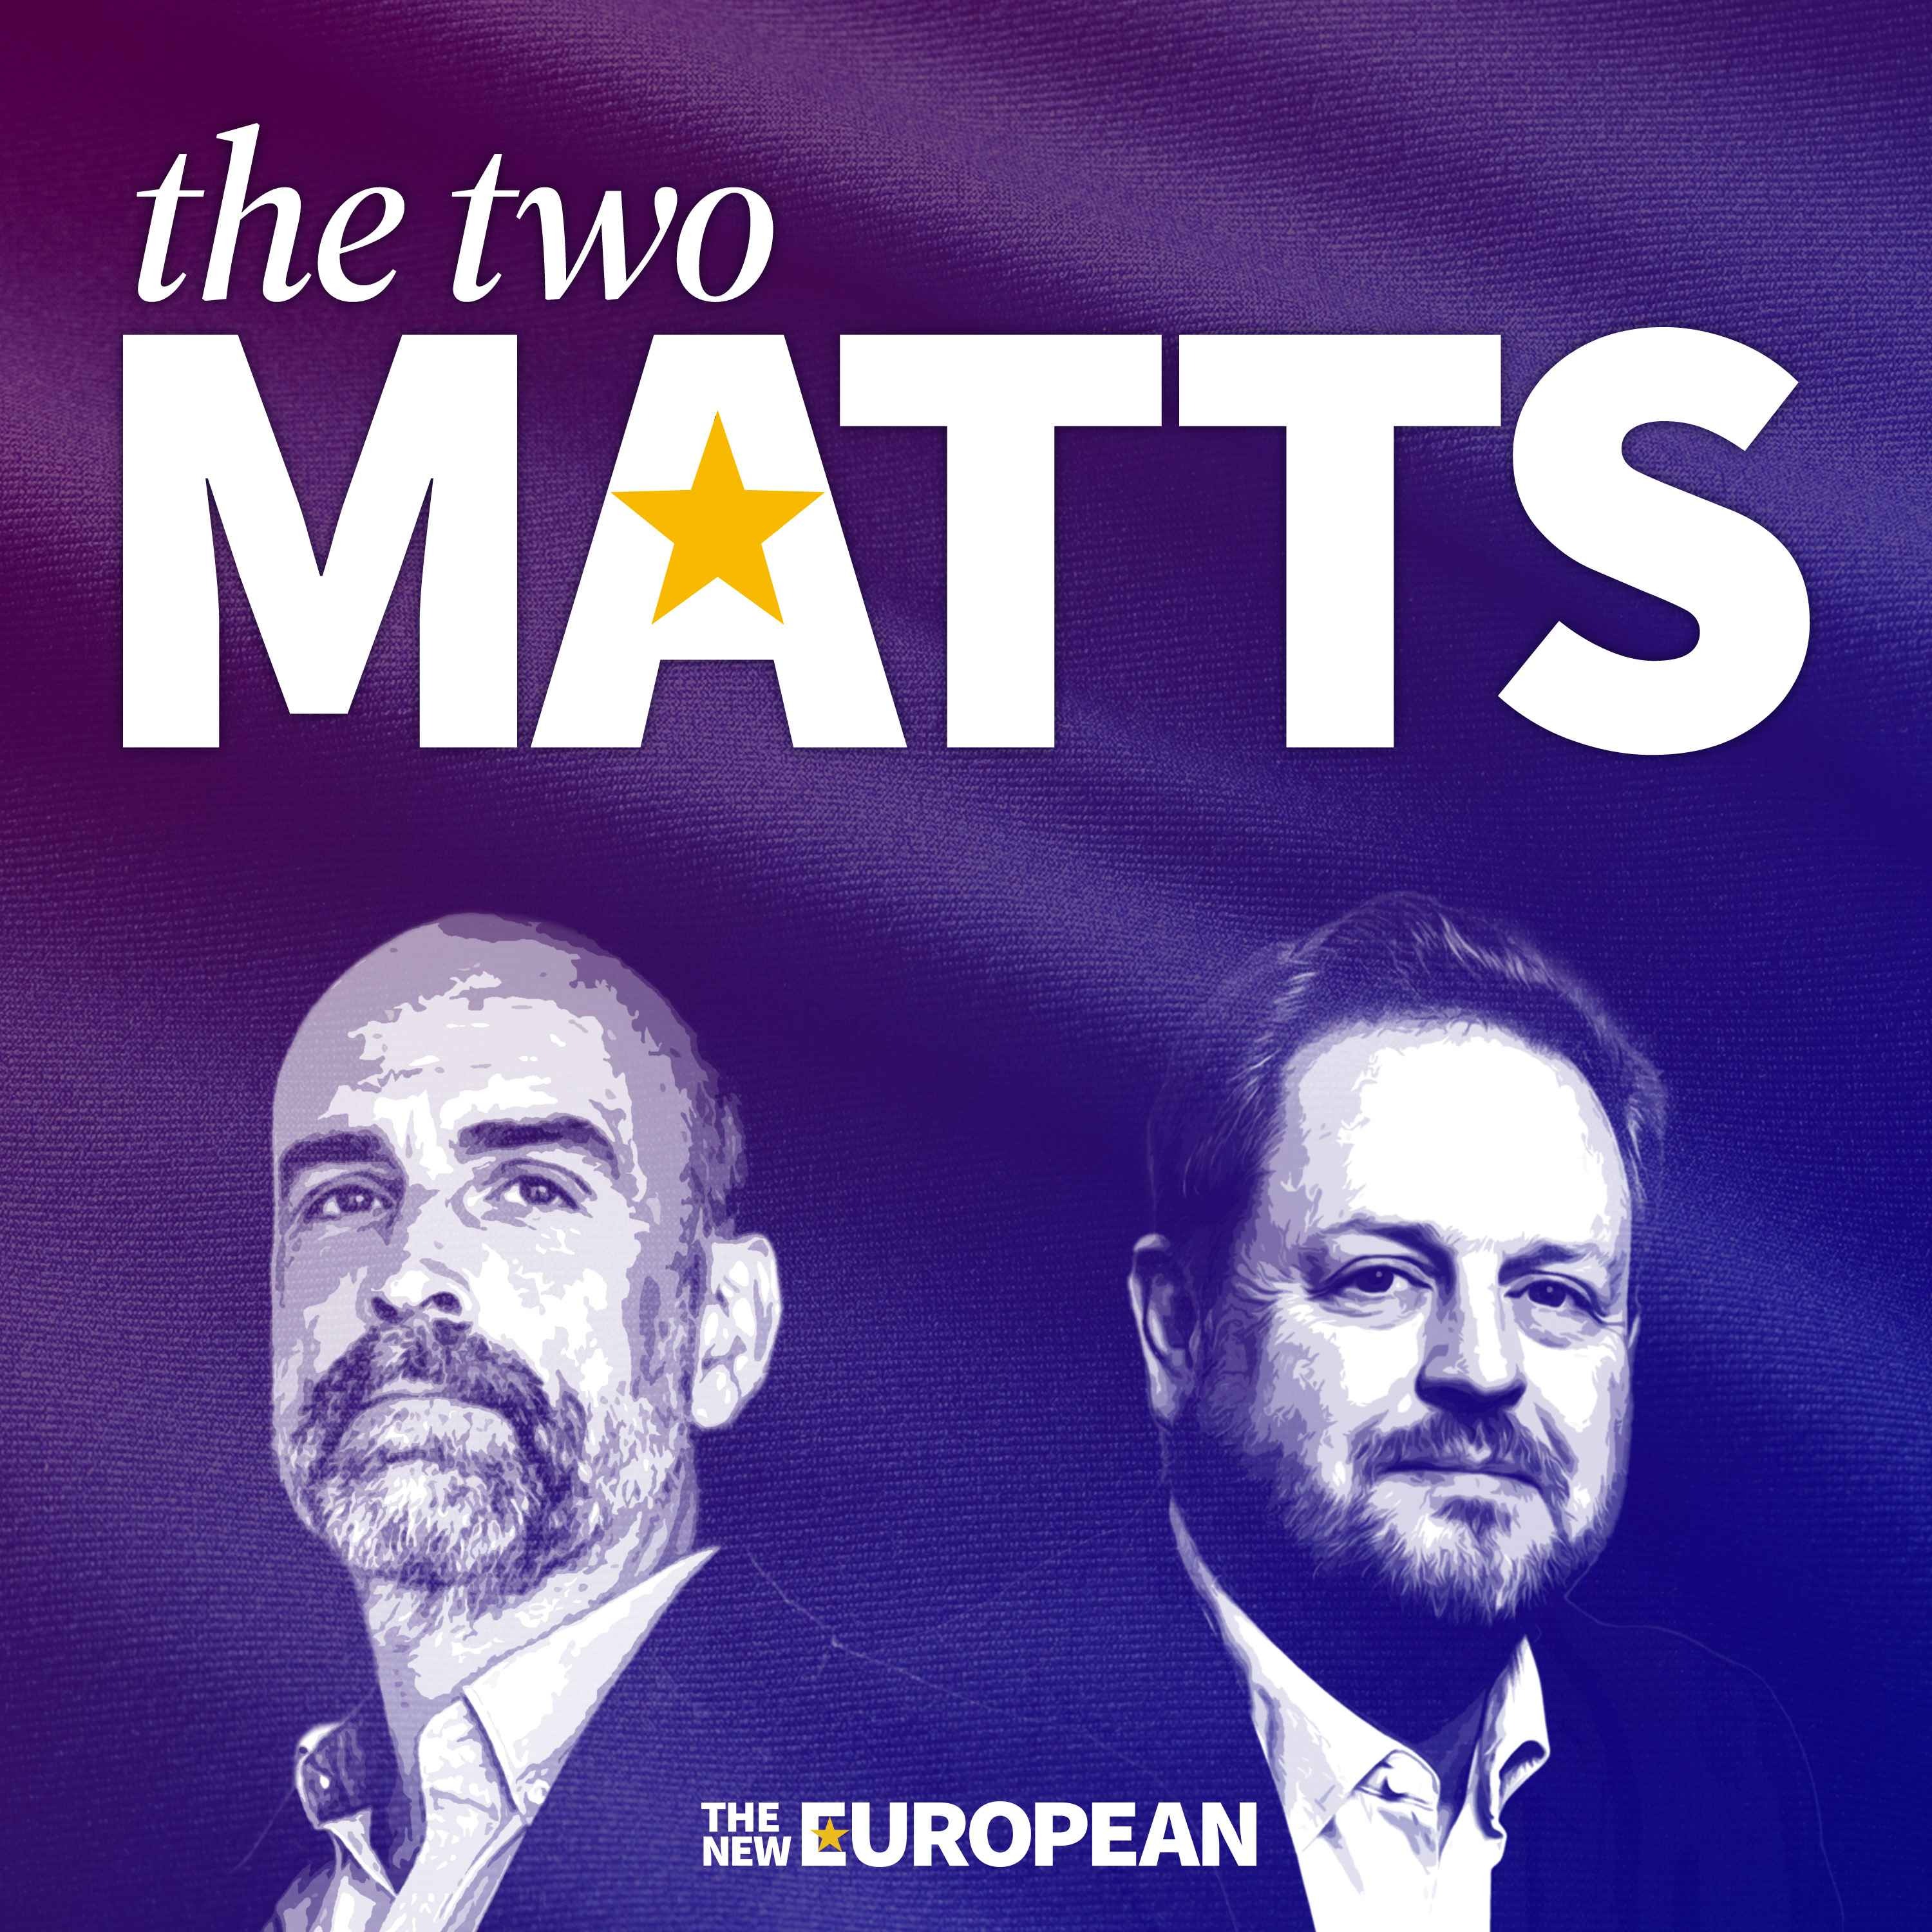 Introducing: The Two Matts